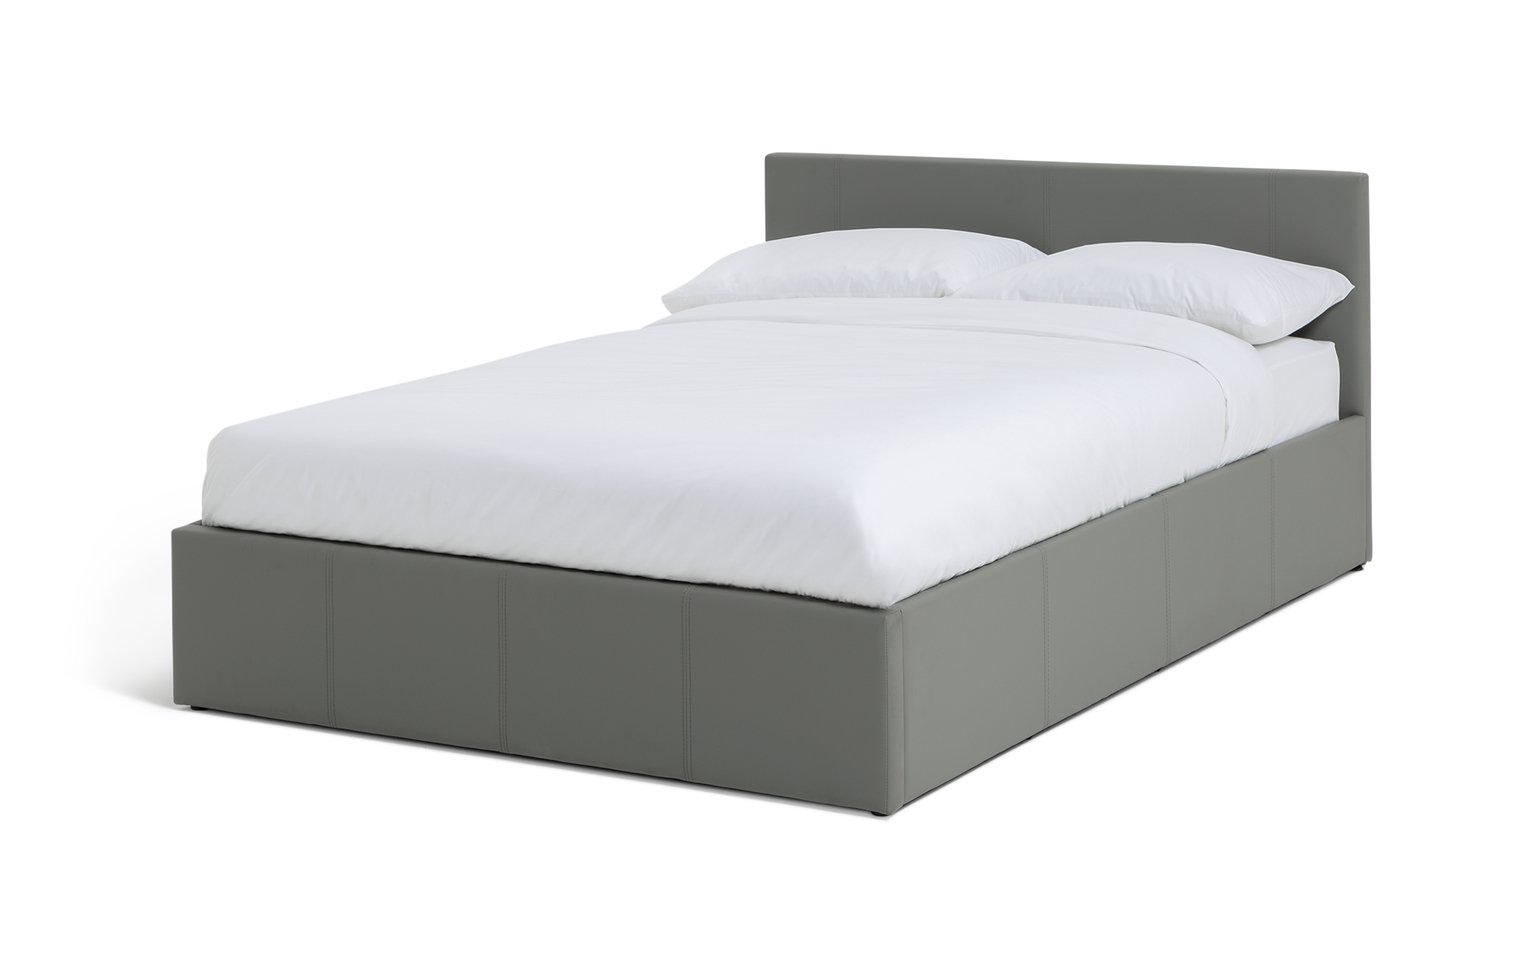 Argos Home Lavendon Double Faux Leather Ottoman Bed Frame review